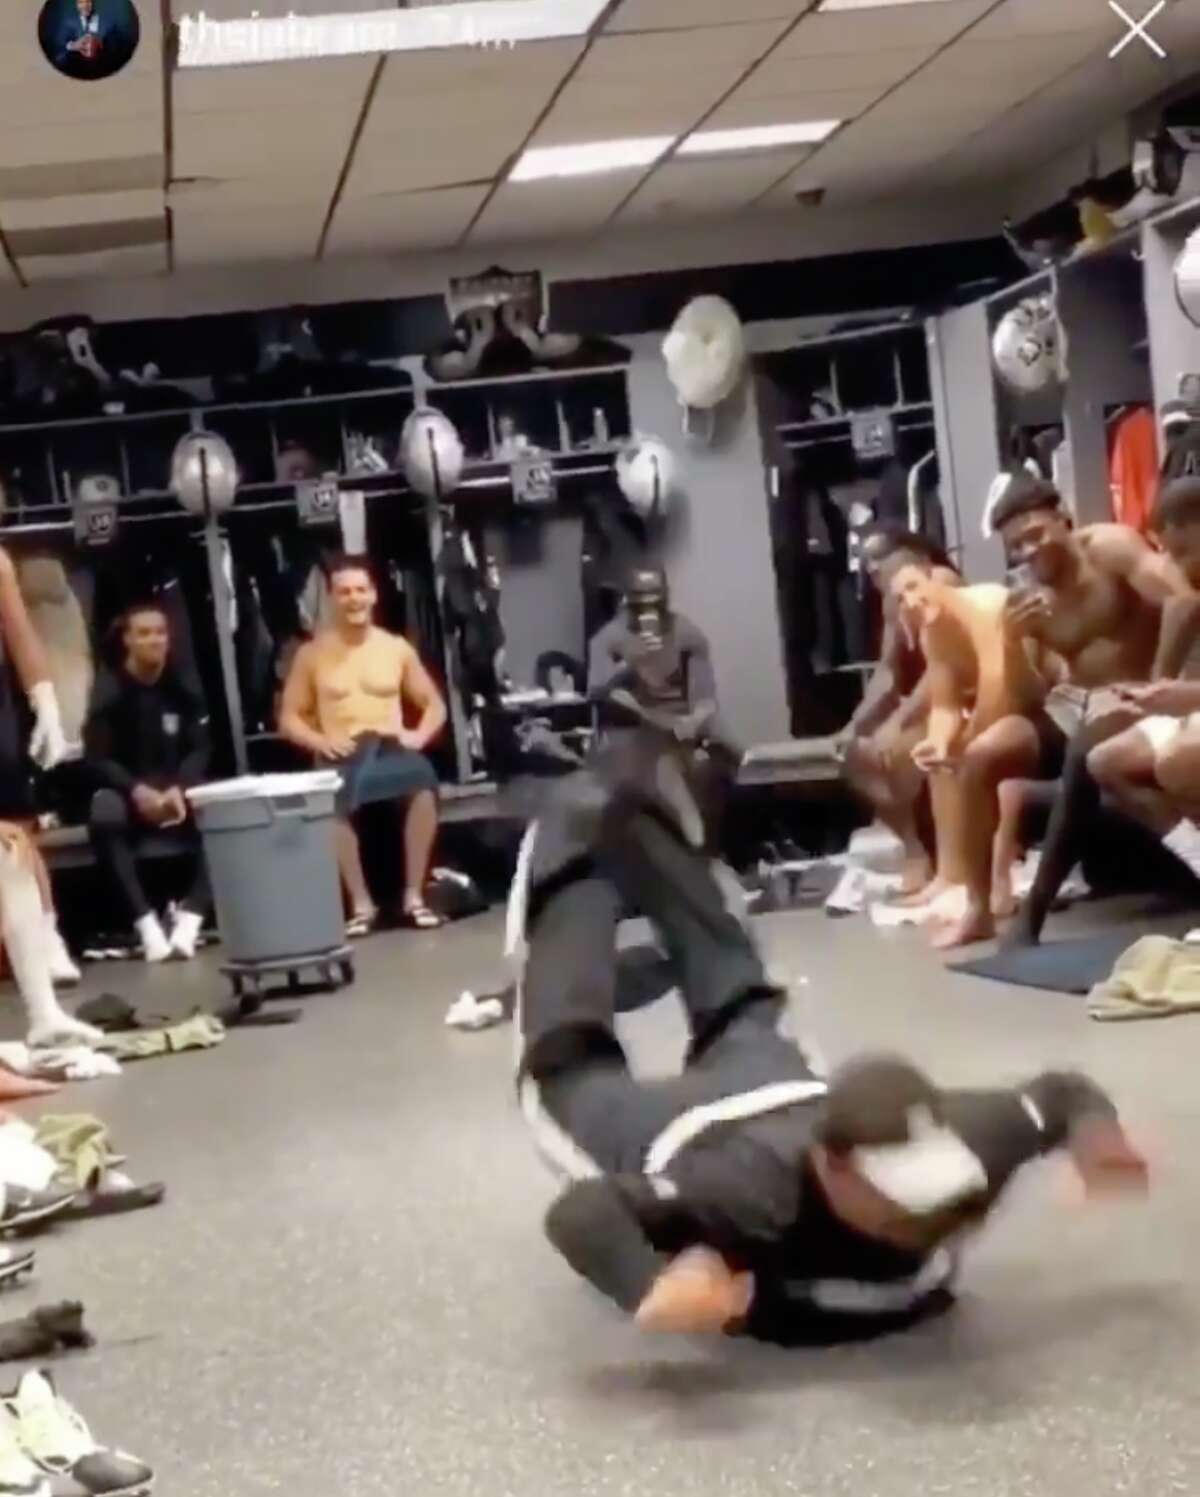 A man, identified by Bleacher Report as a Raiders janitor, busts a move in the team locker room.